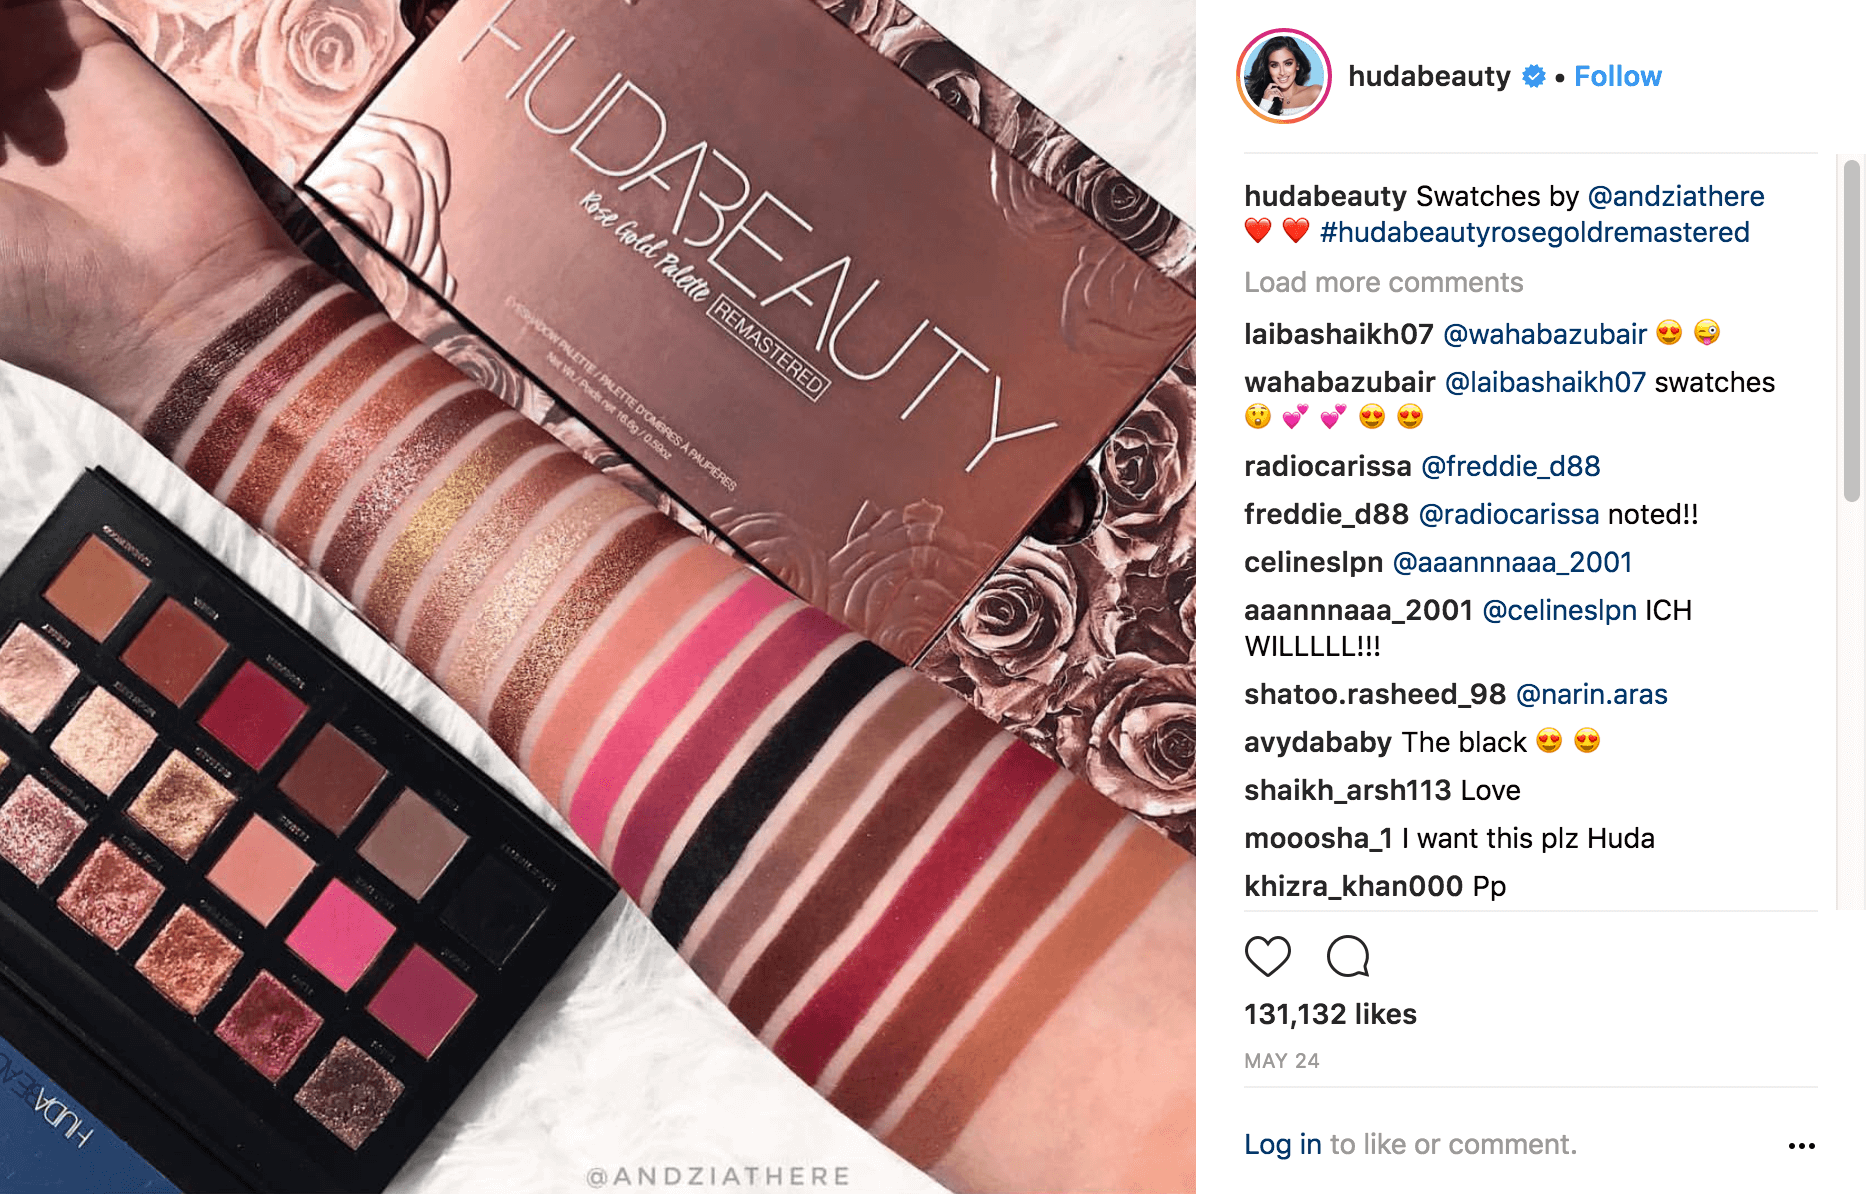 A post made by the Instagram account hudabeauty showing a makeup swatch.